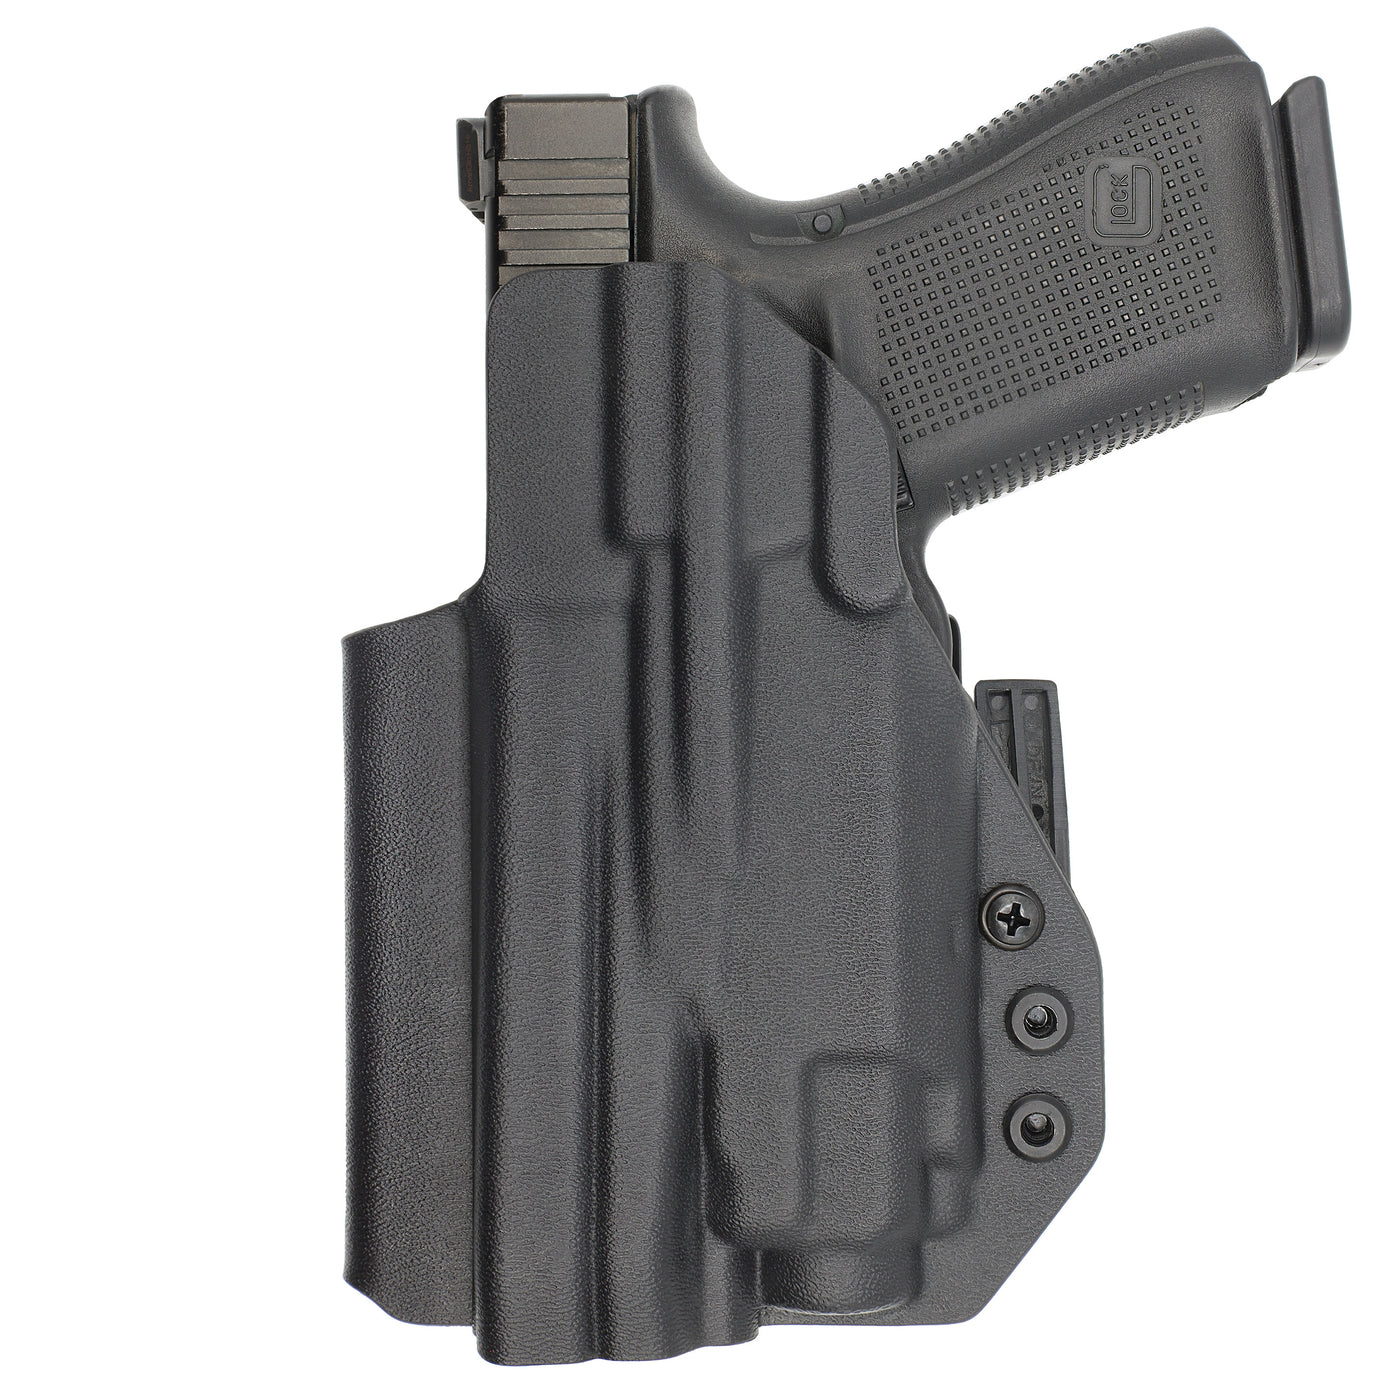 C&G Holsters custom IWB ALPHA UPGRADE tactical Glock 29/30 streamlight TLR8 holstered back view